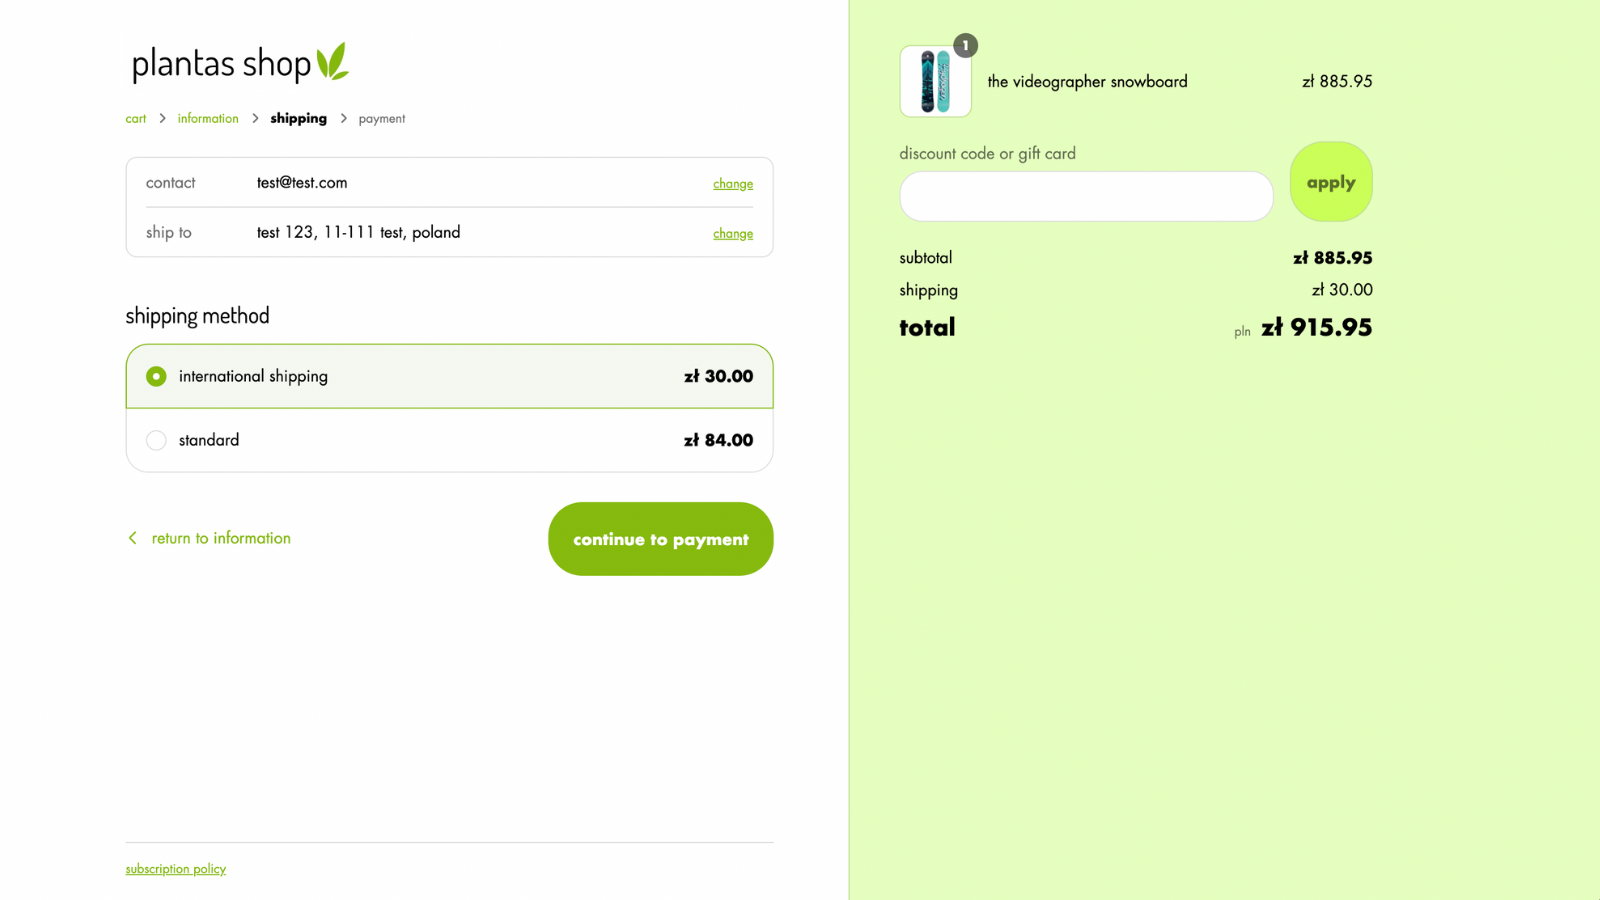 Preview your new customized checkout